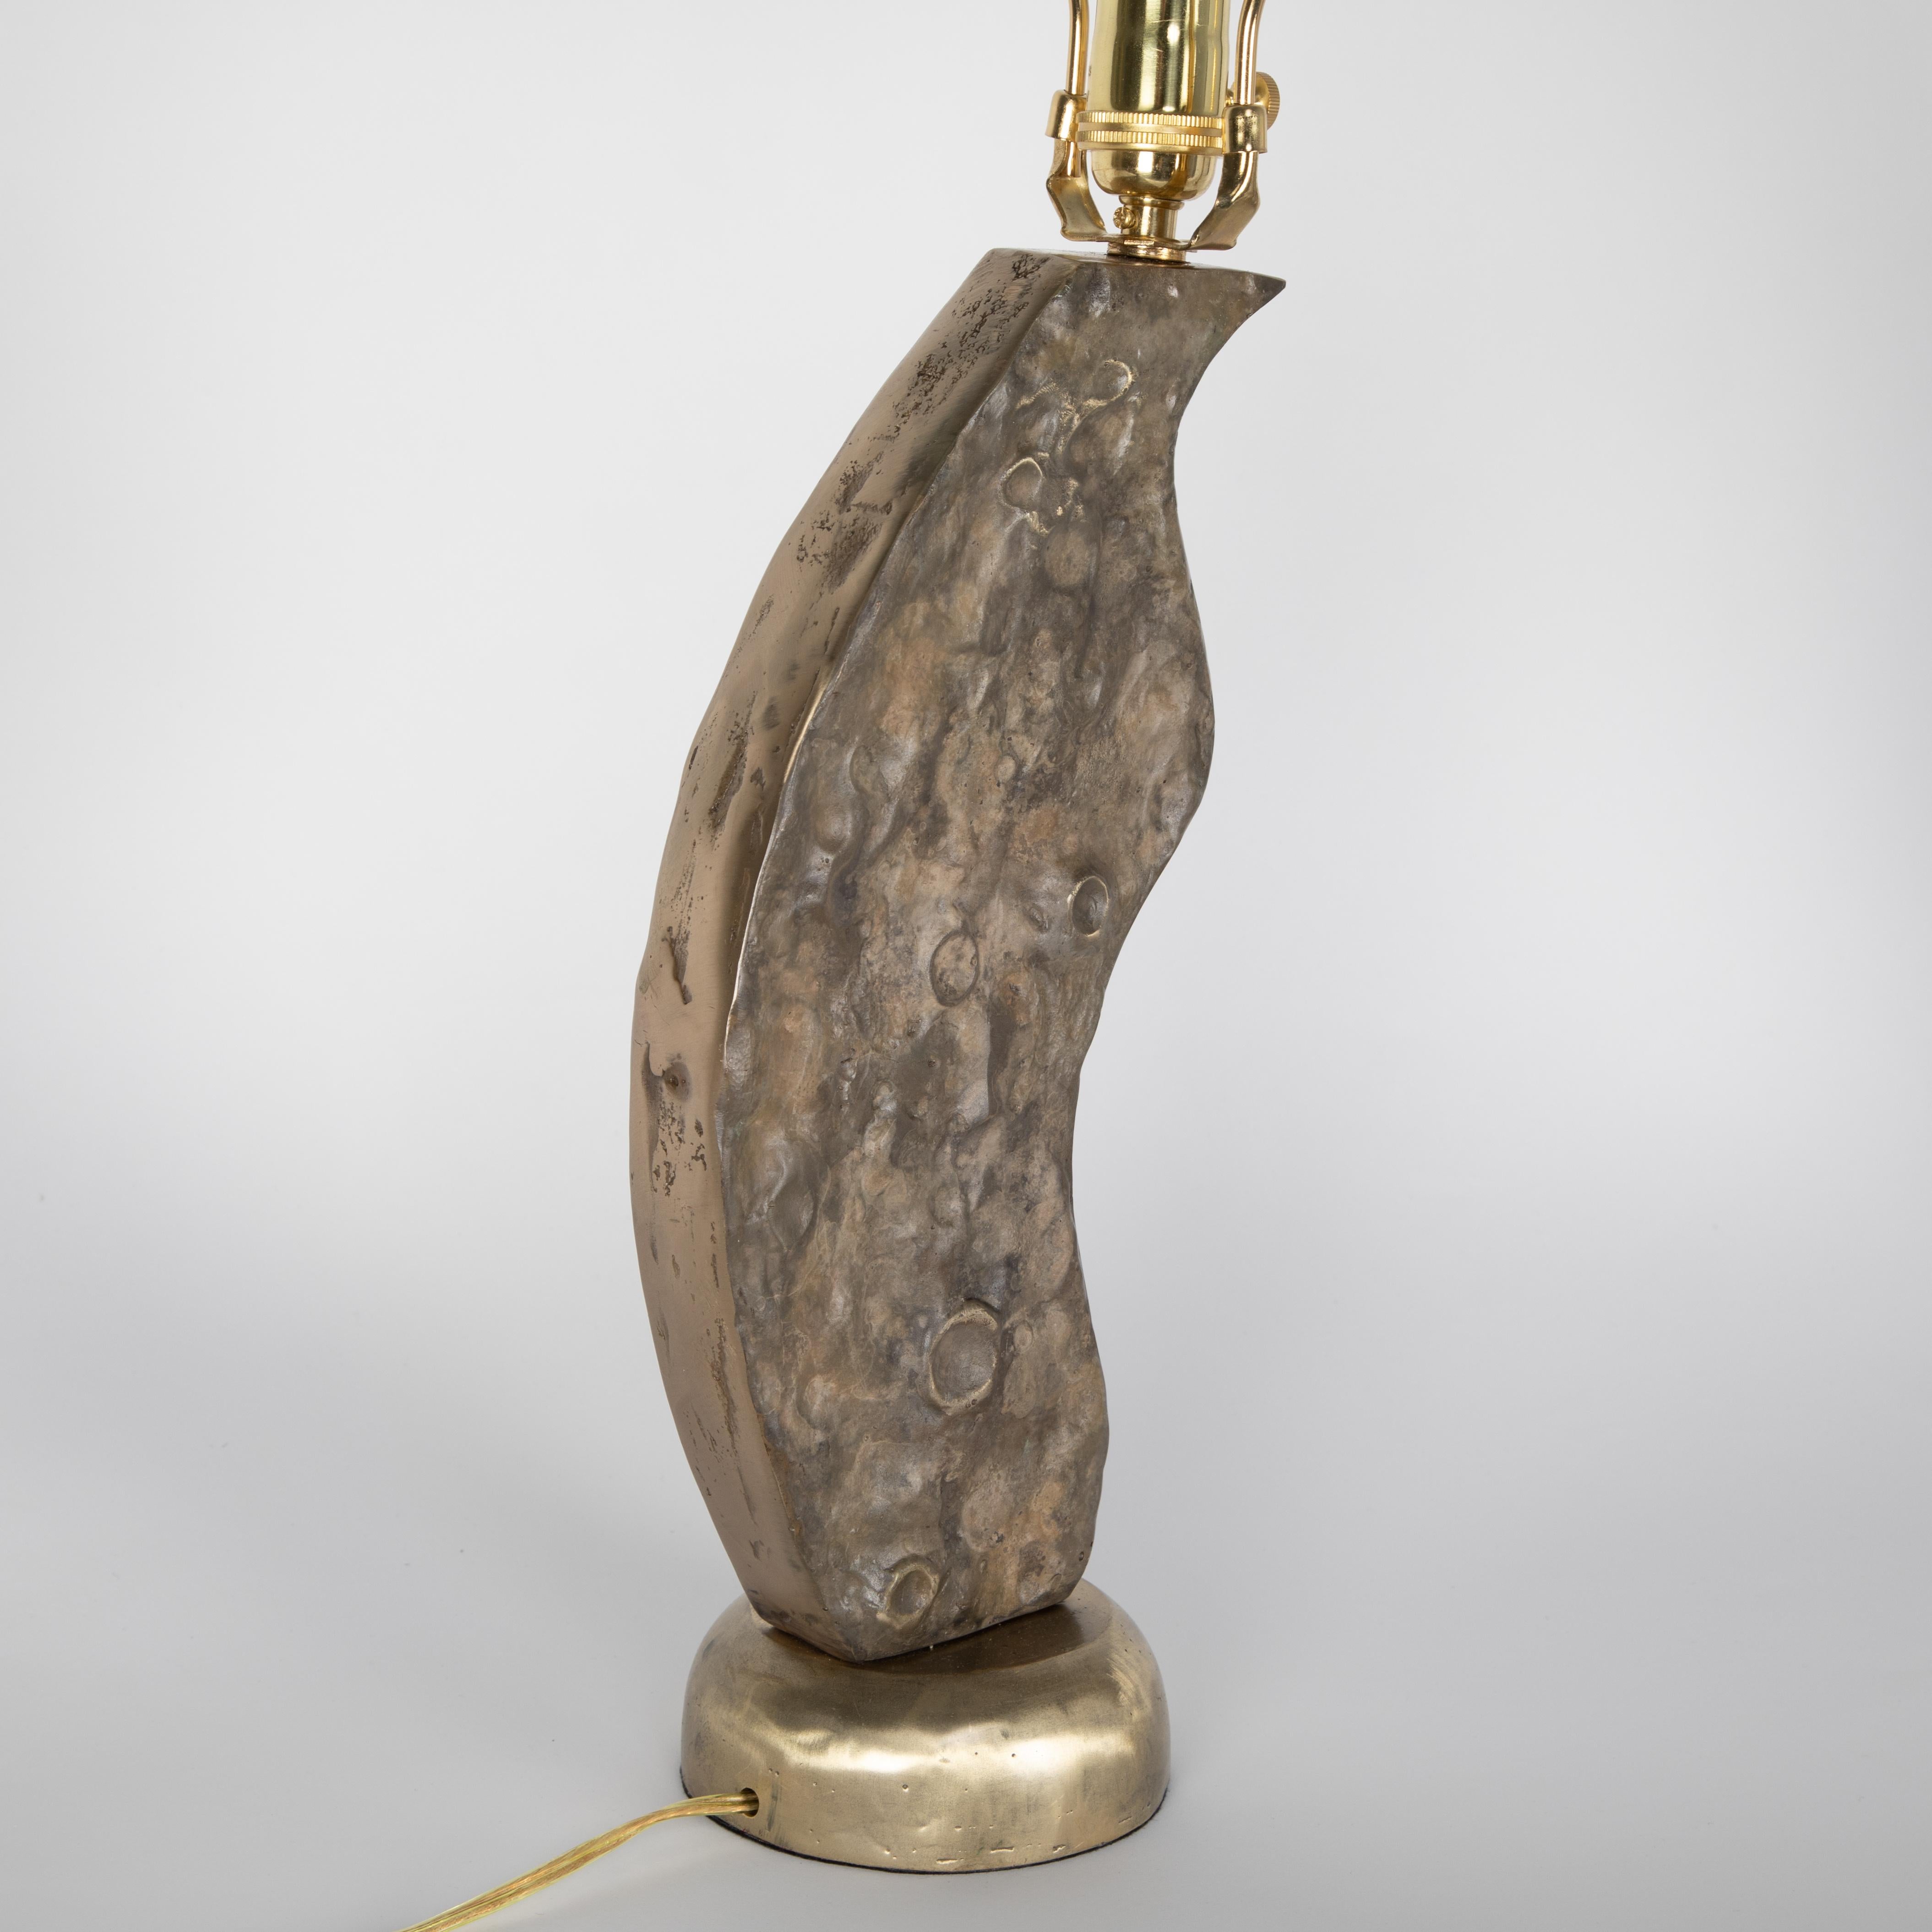 Brutalist Cast Brass Table Lamps, circa 1970s For Sale 2